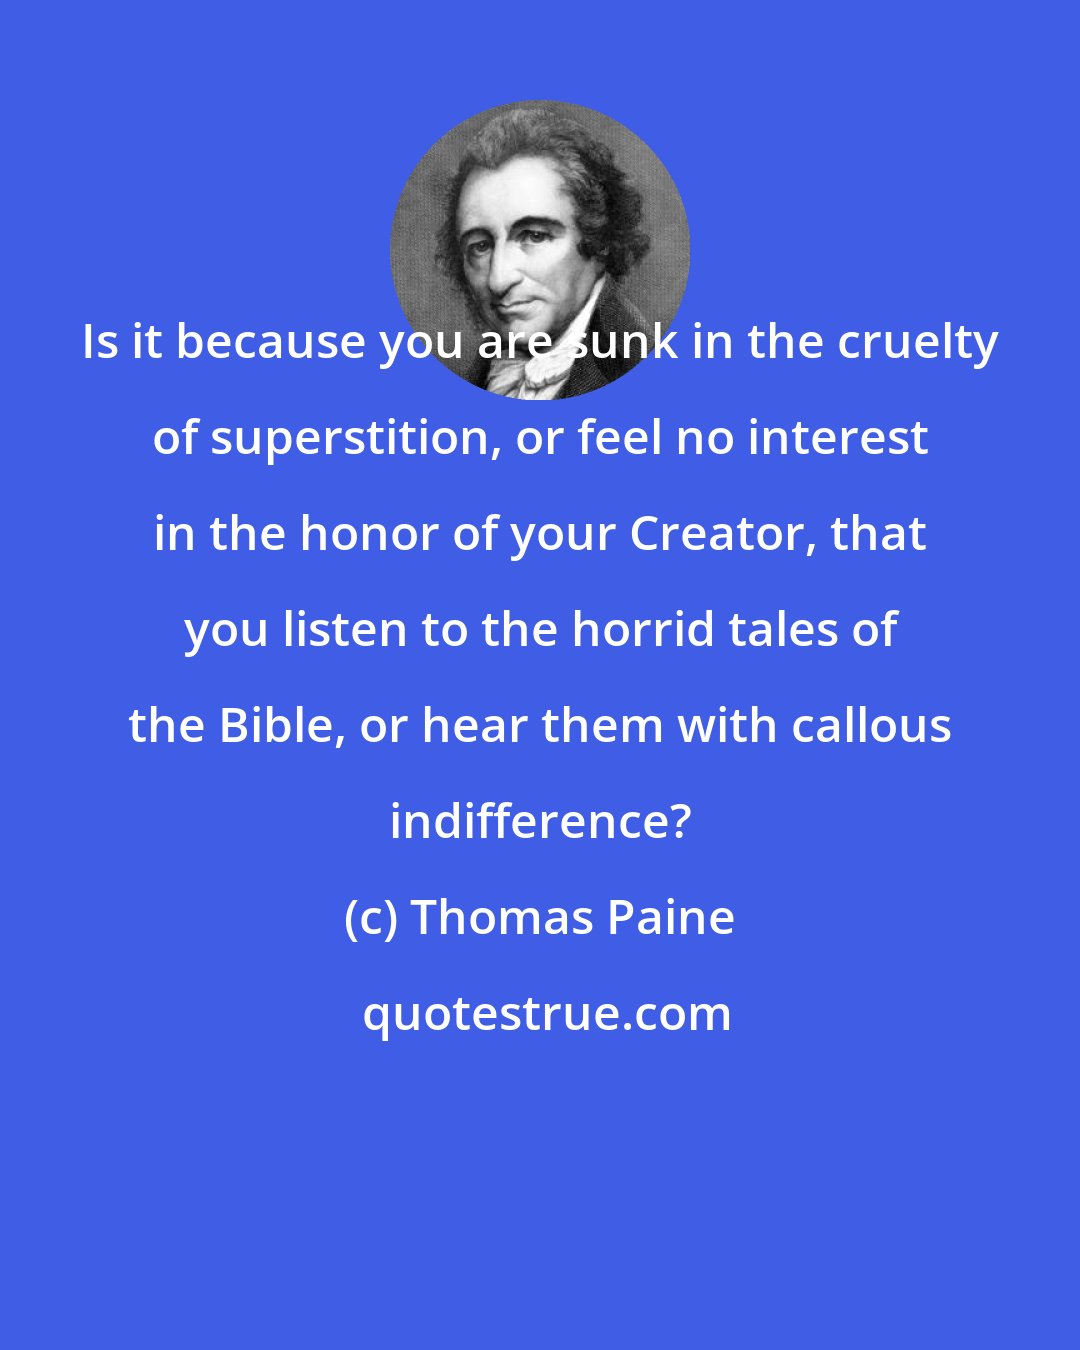 Thomas Paine: Is it because you are sunk in the cruelty of superstition, or feel no interest in the honor of your Creator, that you listen to the horrid tales of the Bible, or hear them with callous indifference?